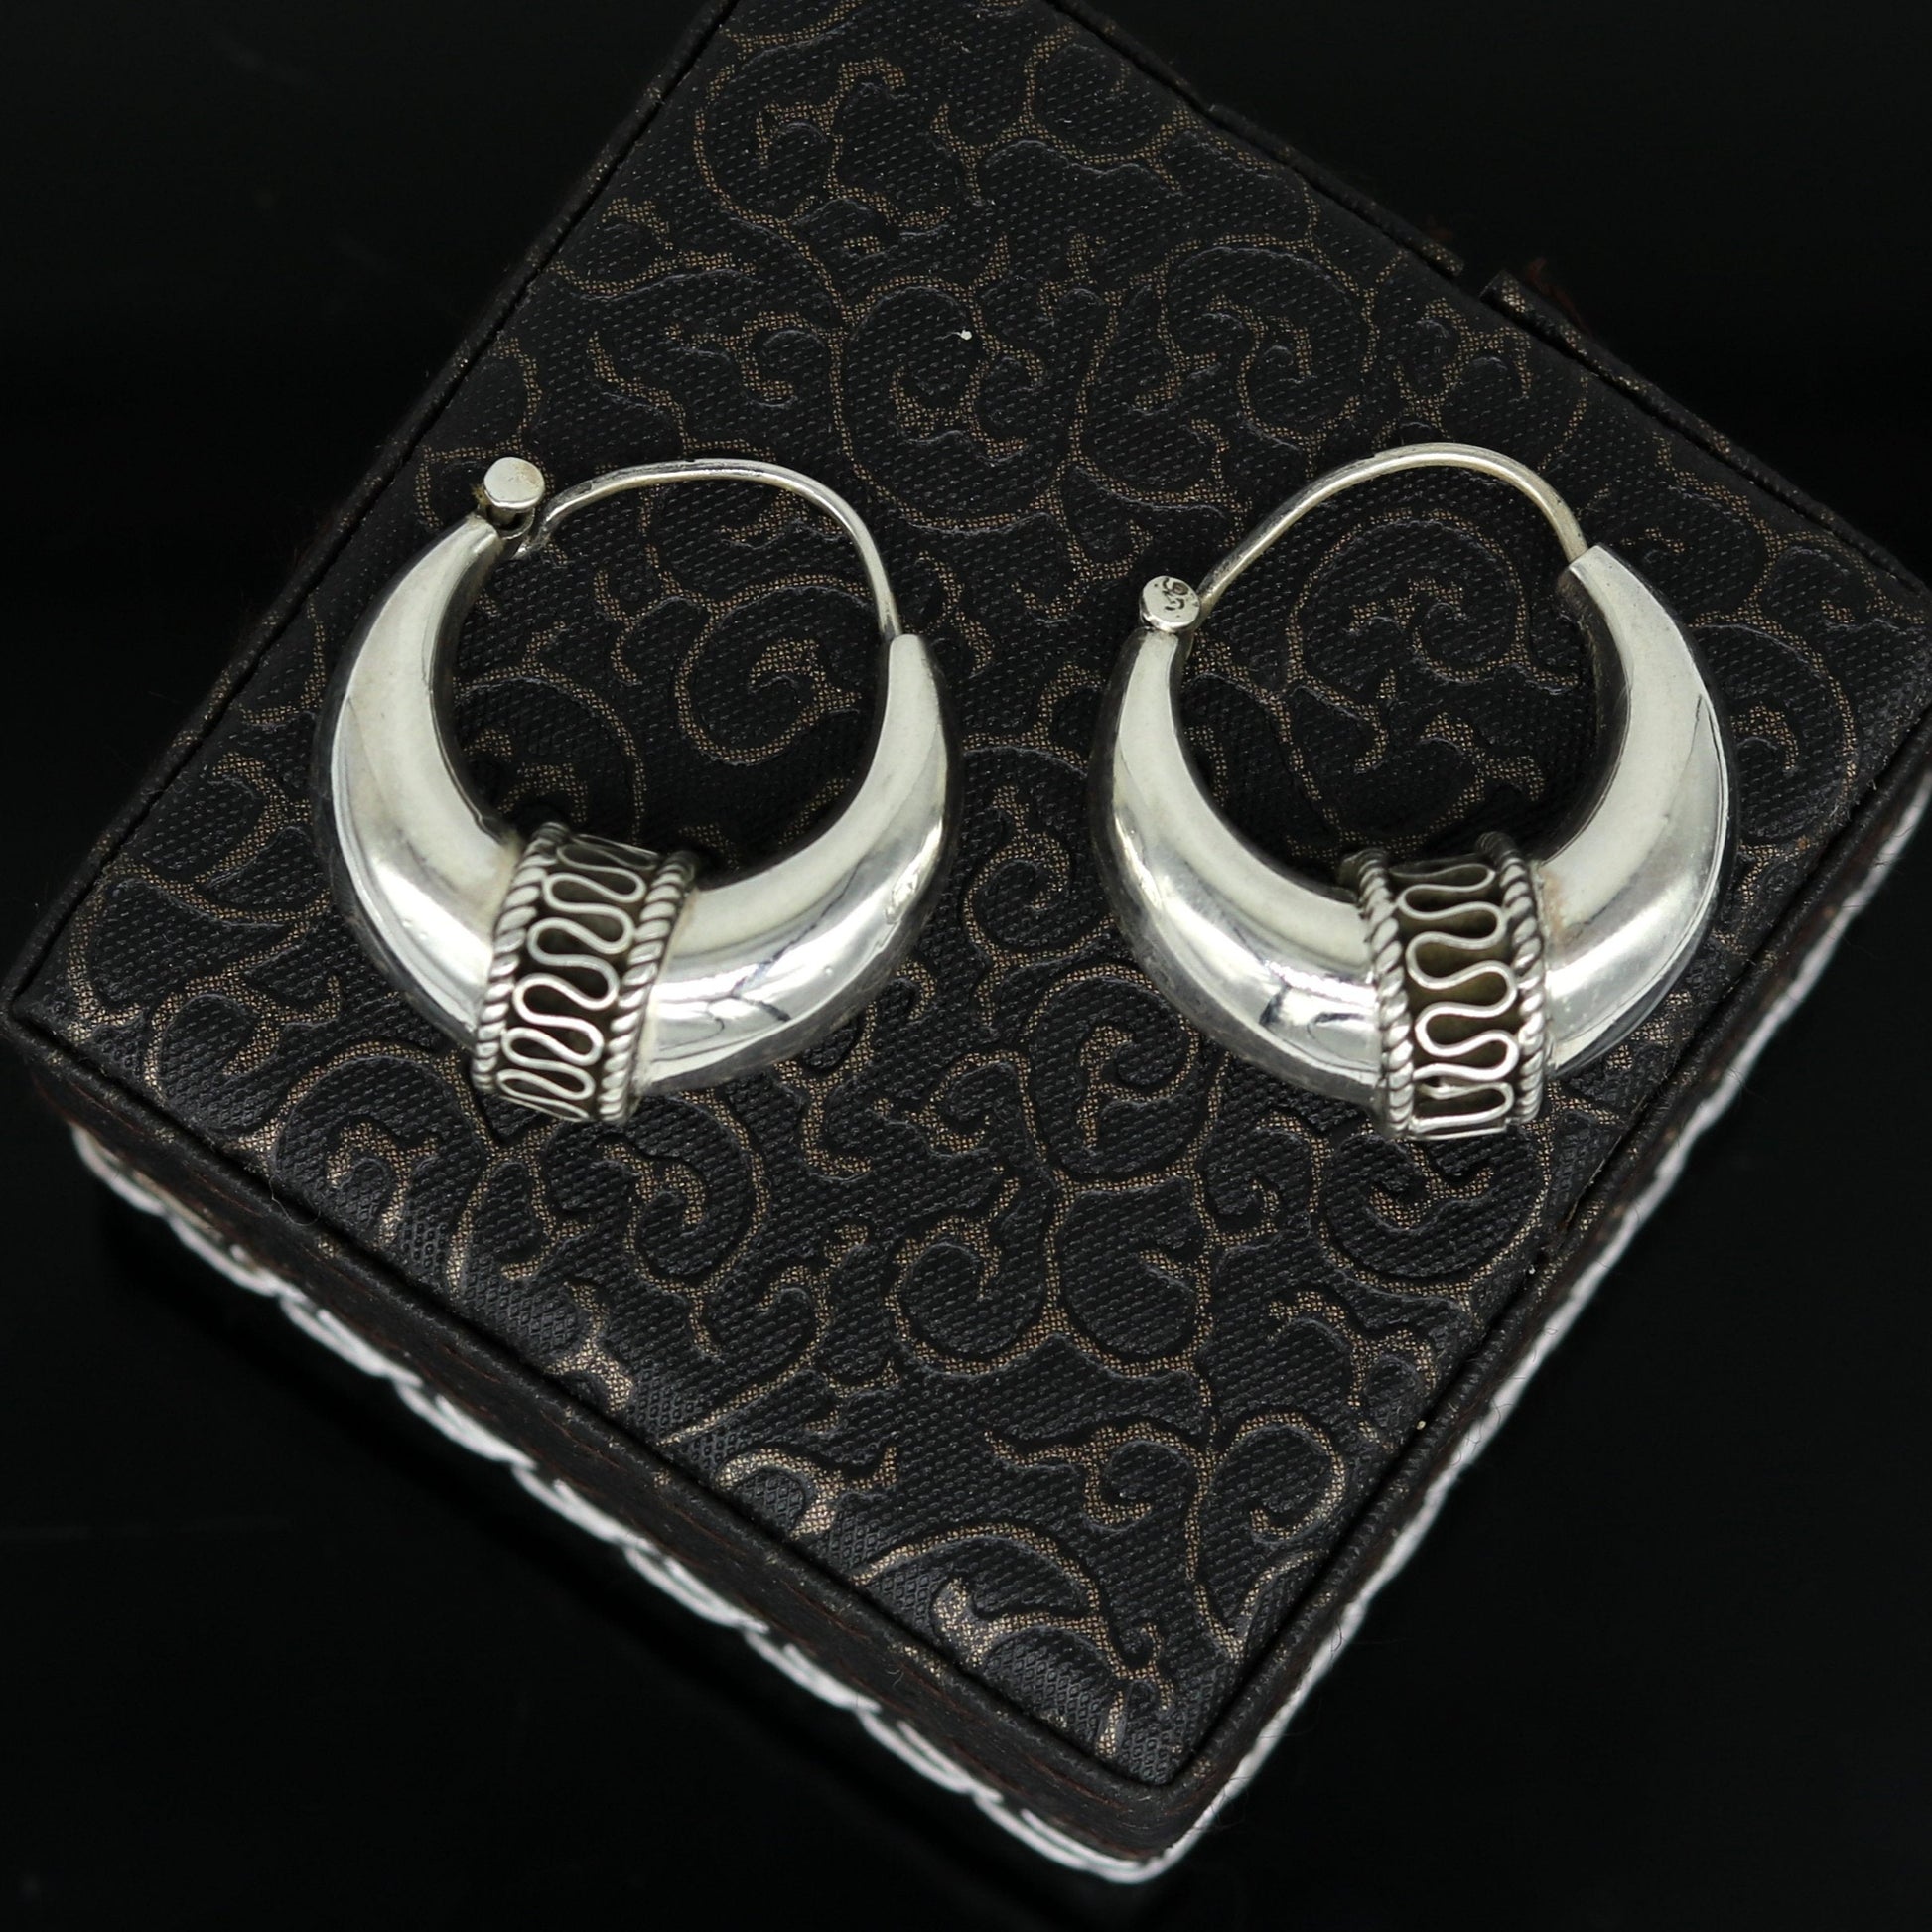 925 sterling silver handmade pretty attractive hoops stud earring bali, excellent customized stylish belly dance personalized gift ske11 - TRIBAL ORNAMENTS